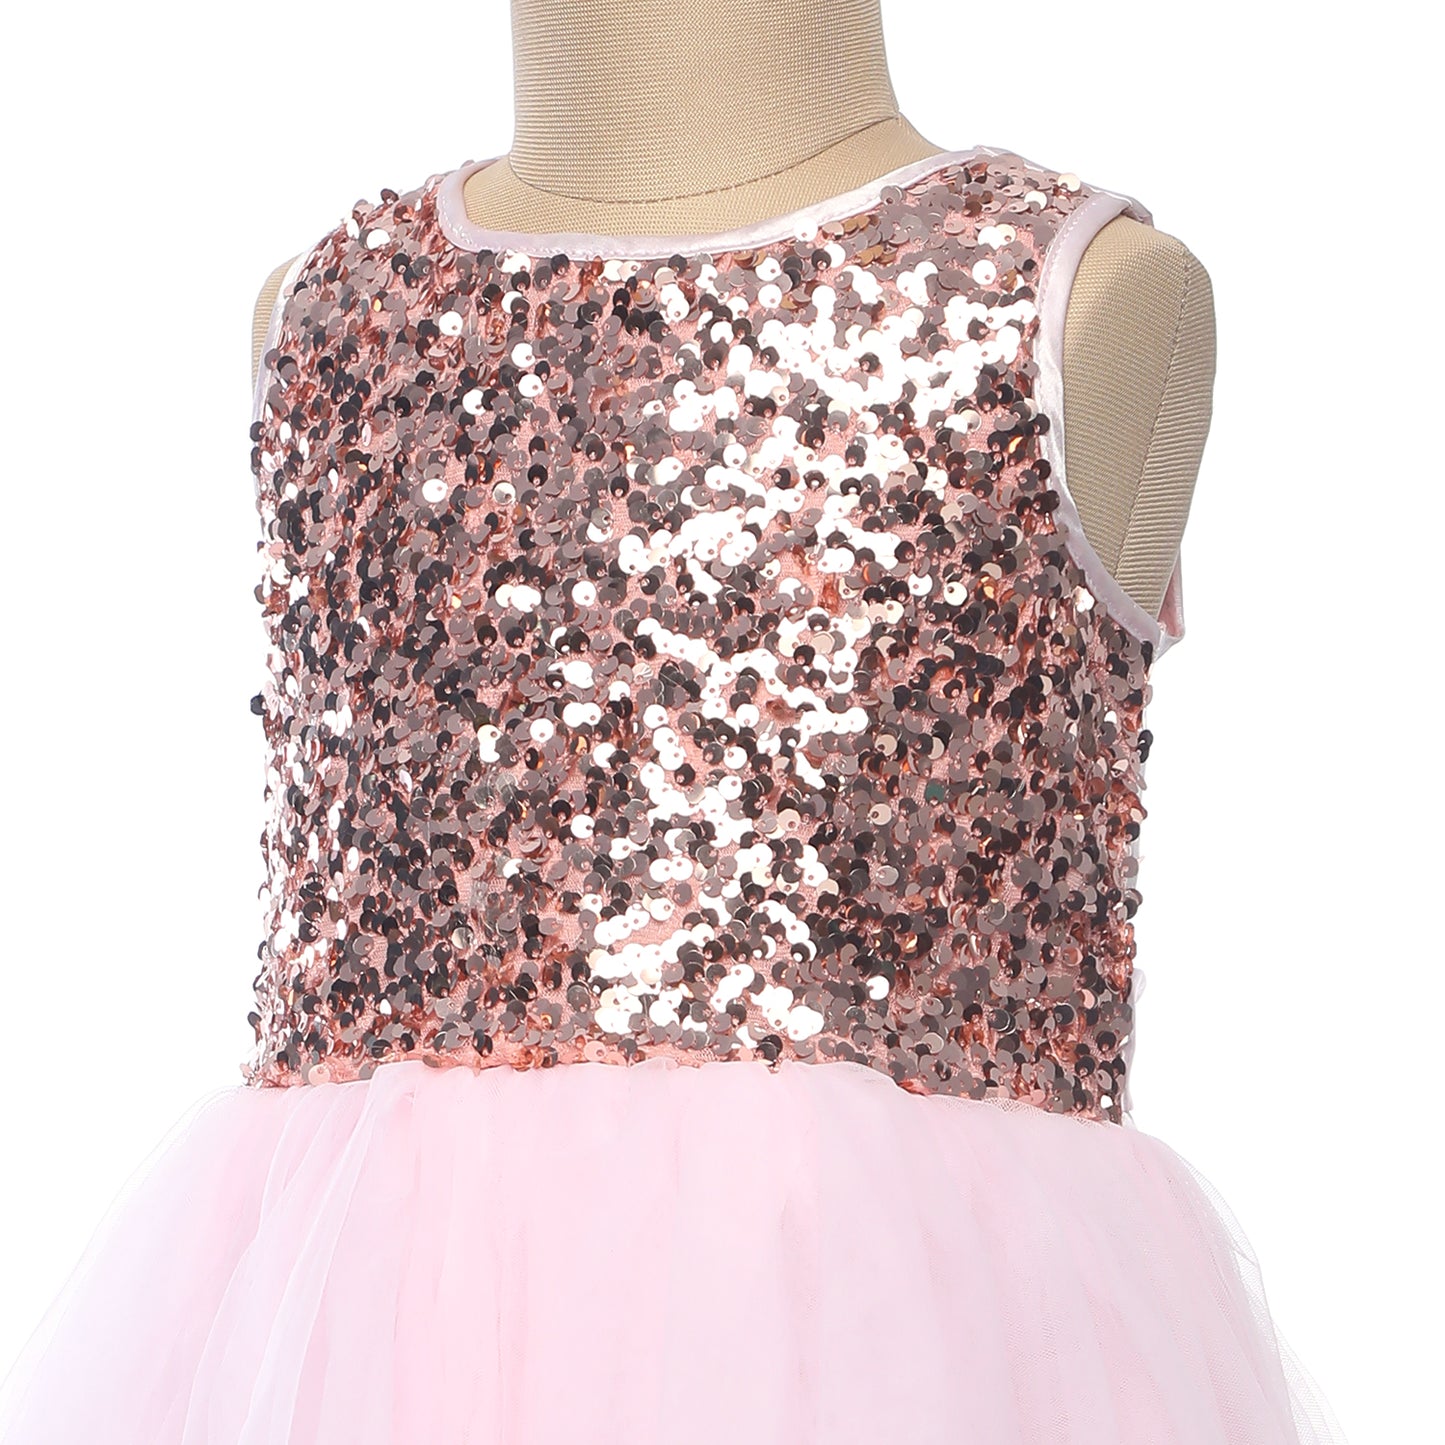 Candy Pink Glitter High Low Style Dress. Perfect for Birthday Parties, Flower Girls.